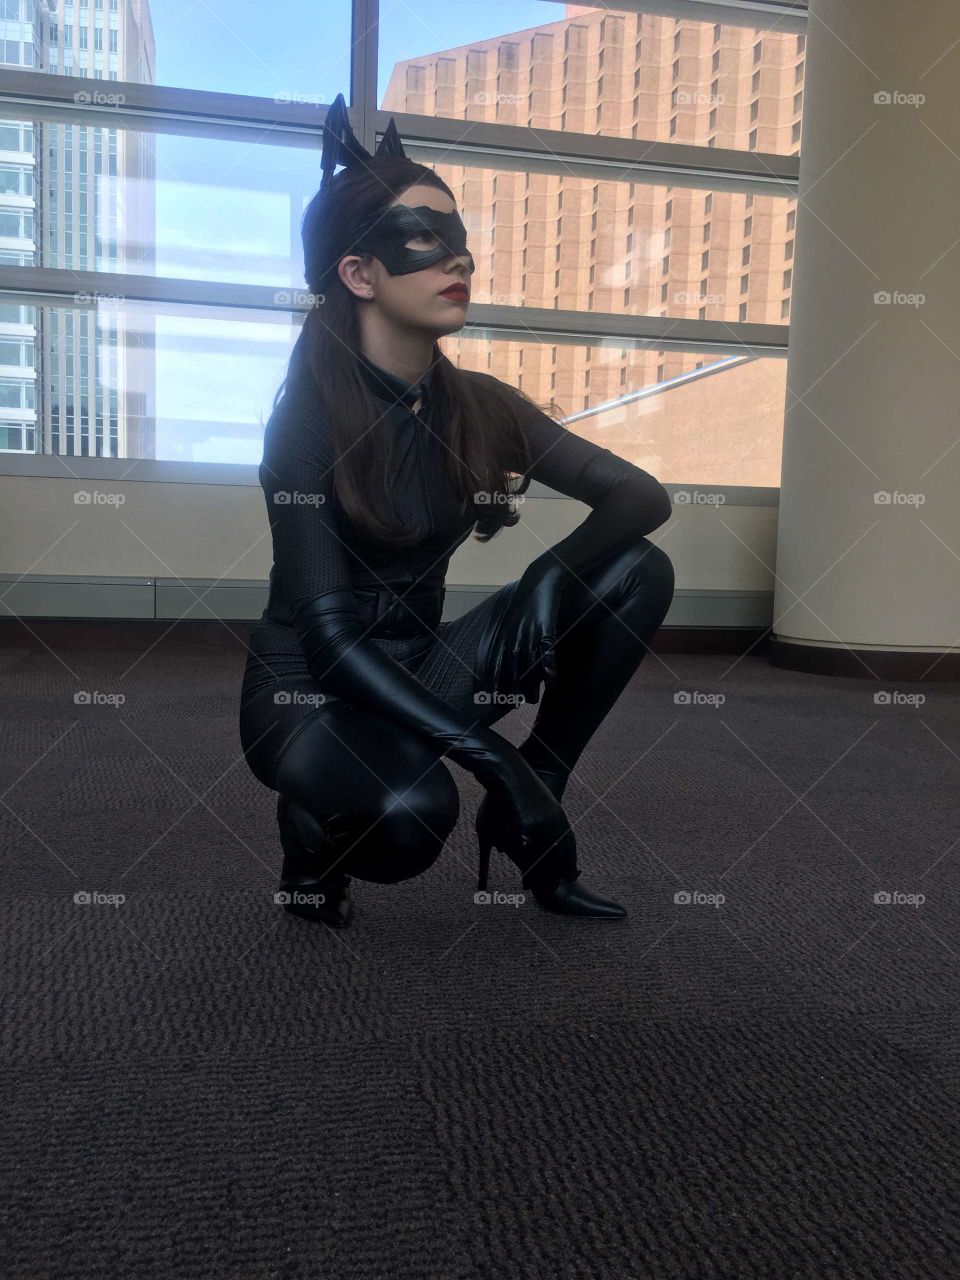 A beautiful young woman cosplaying as Catwoman